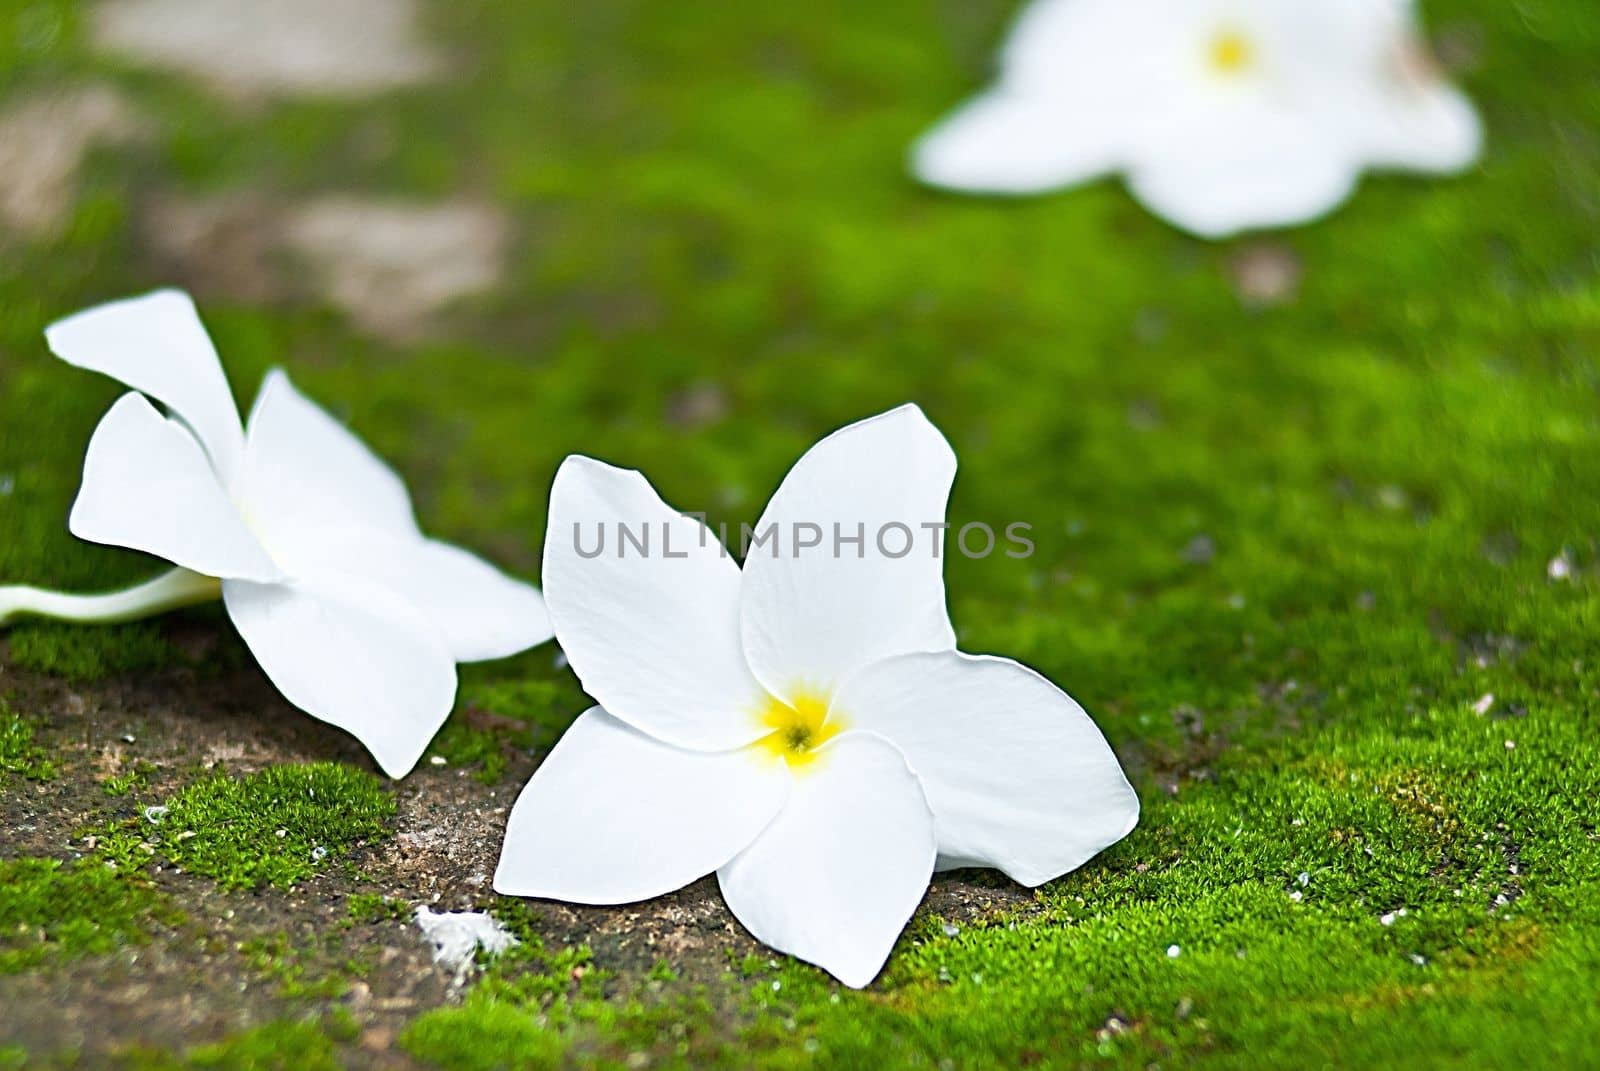 photo of white wild flowers, close-up with blur background by rakoptonLPN